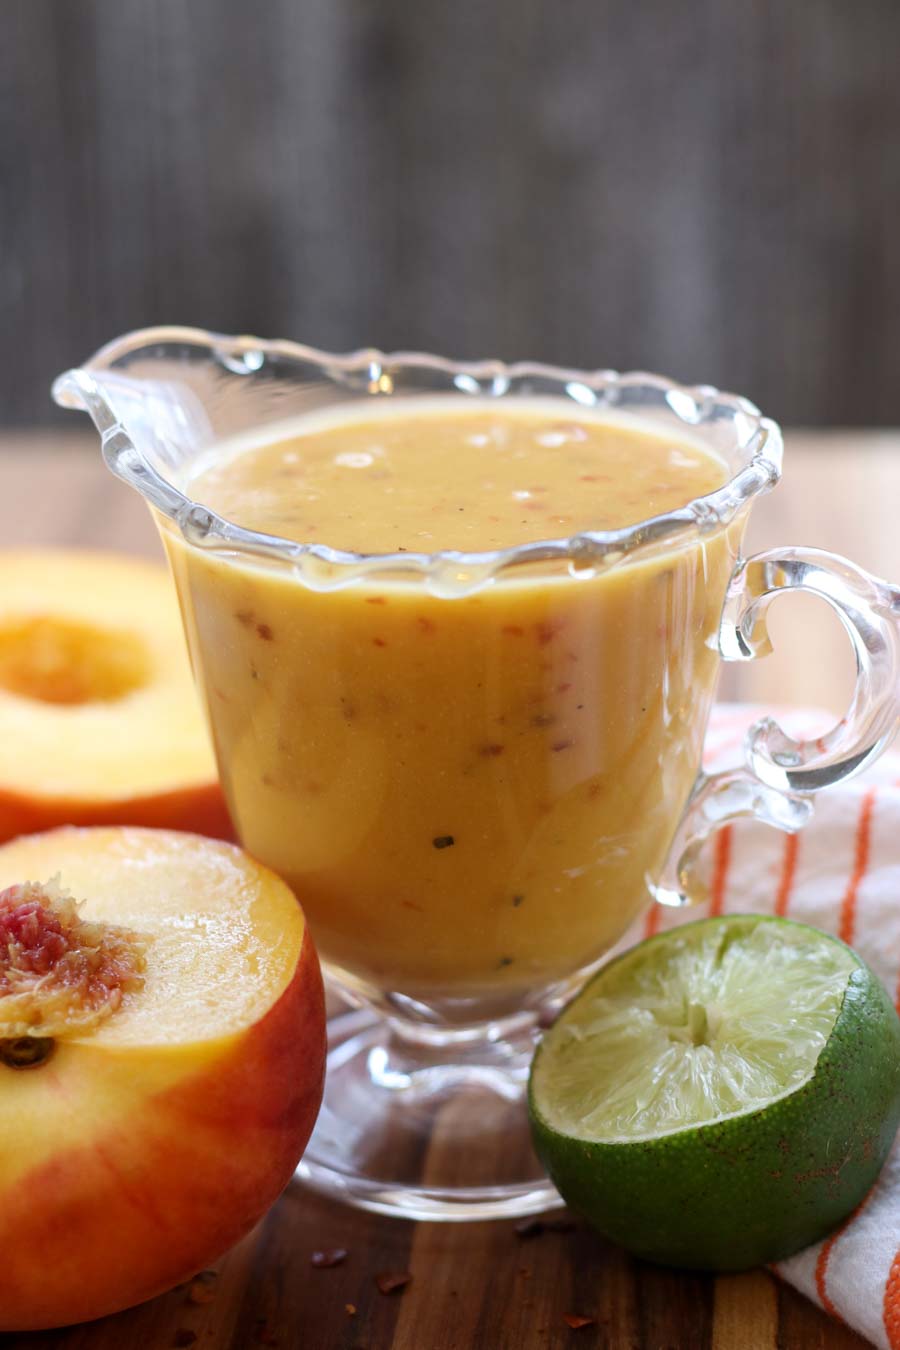 Grilled Peach Salad Dressing in a serving dish